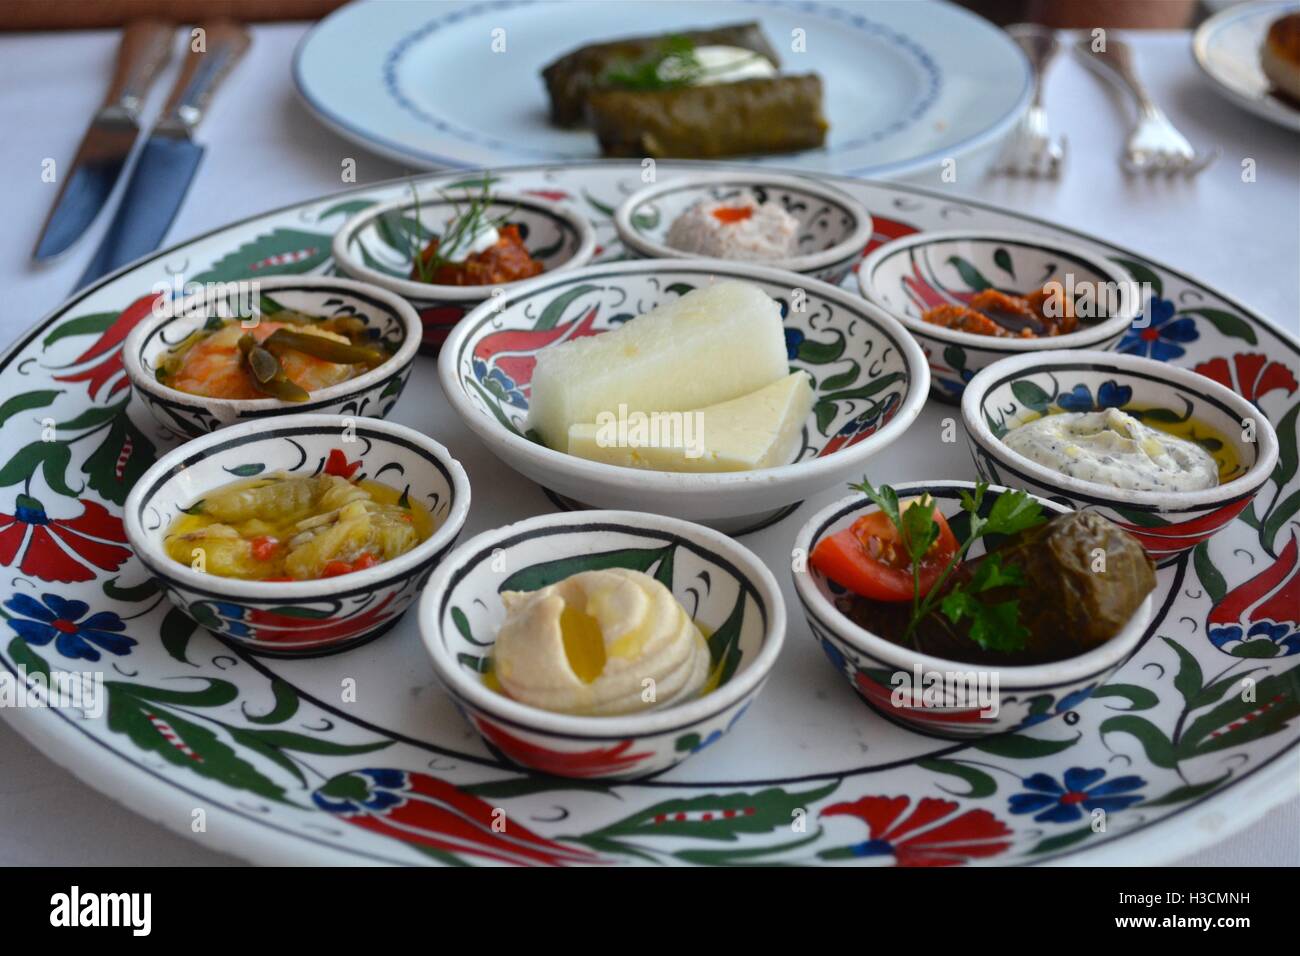 Turkish mezze appetizer at a restaurant in Istanbul. Stock Photo